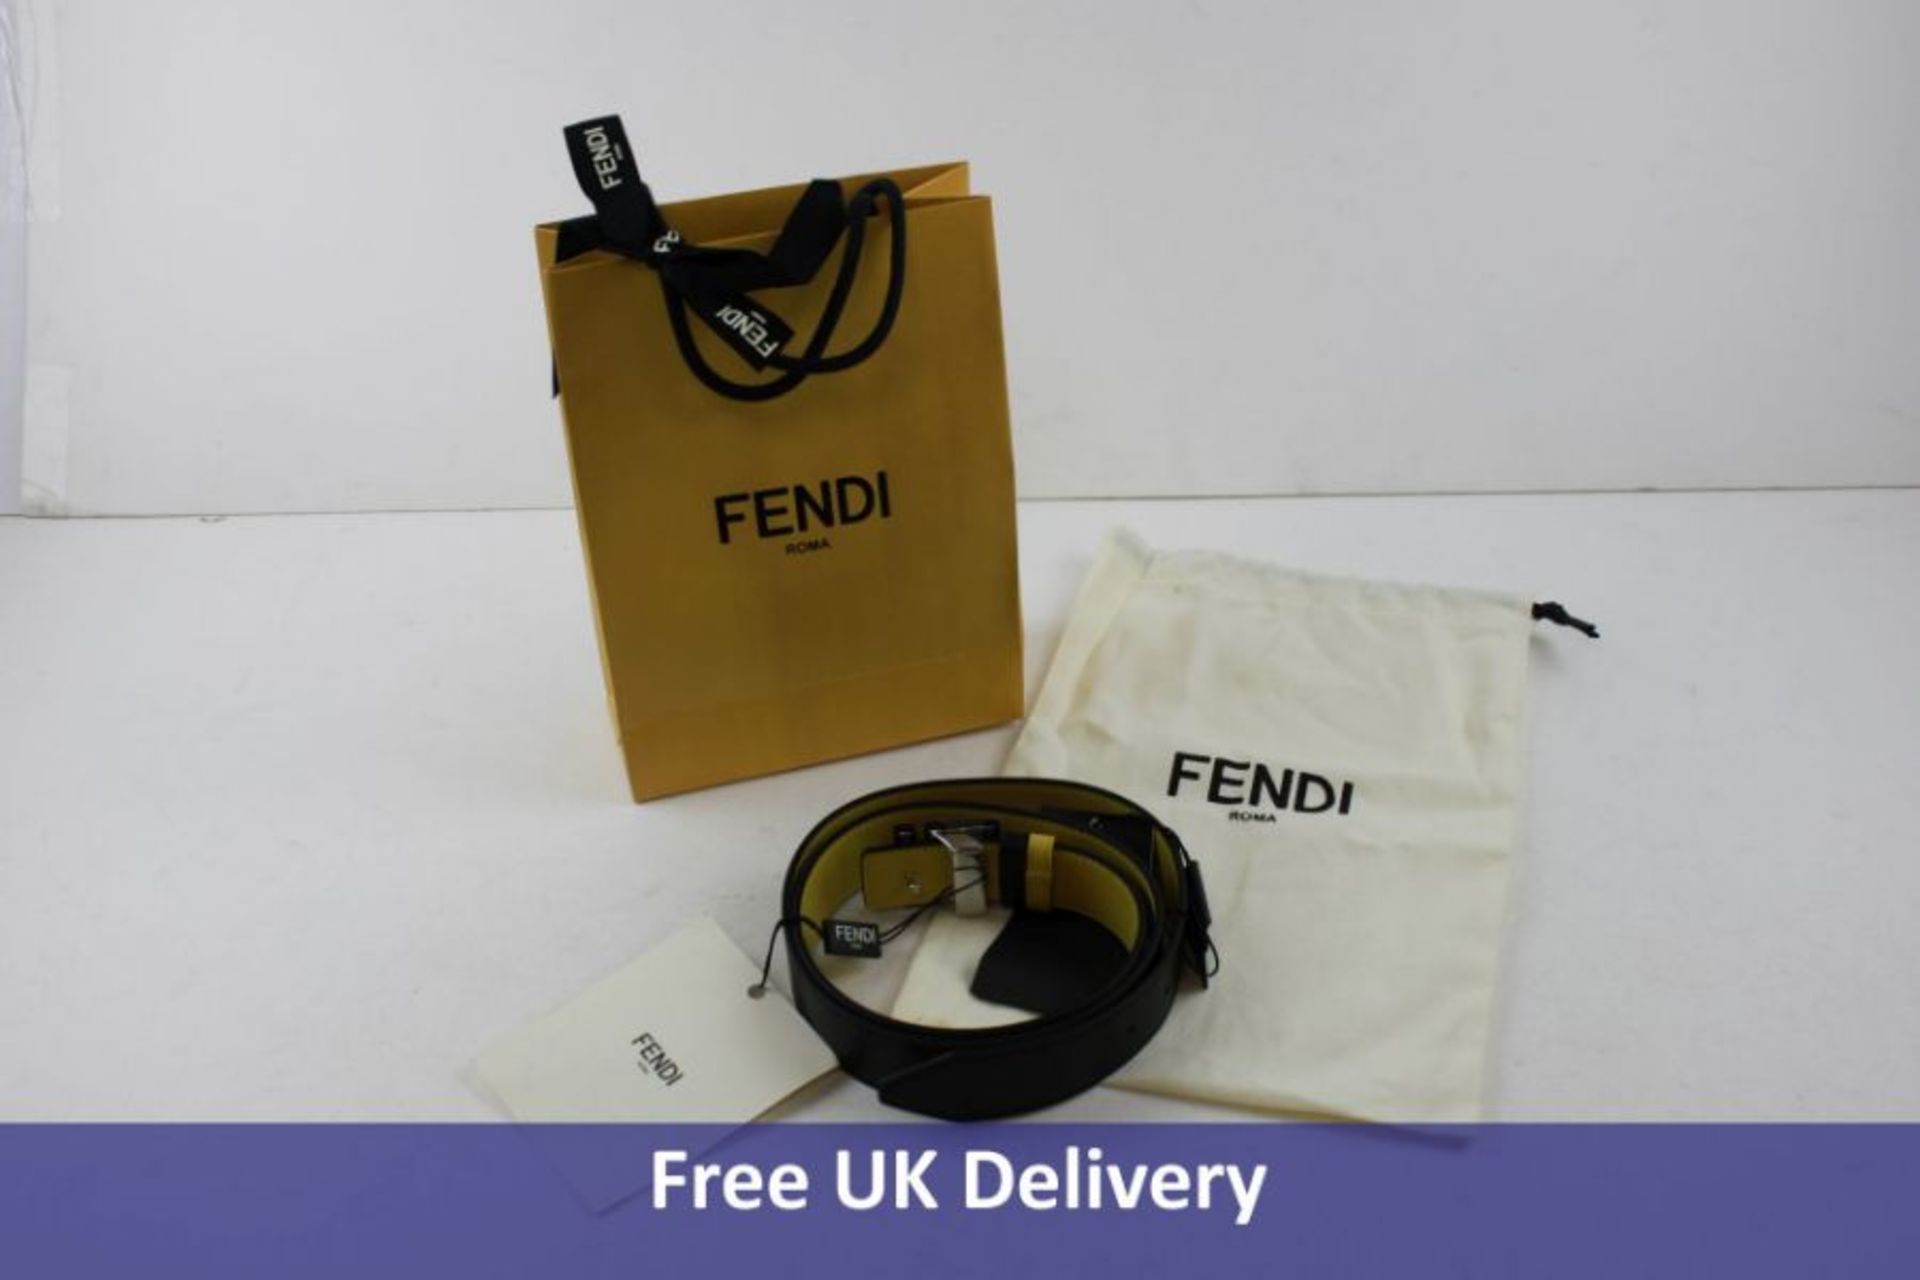 Fendi Men's Reversible Leather FF Buckle Belt, Black and Yellow, Size 100/40